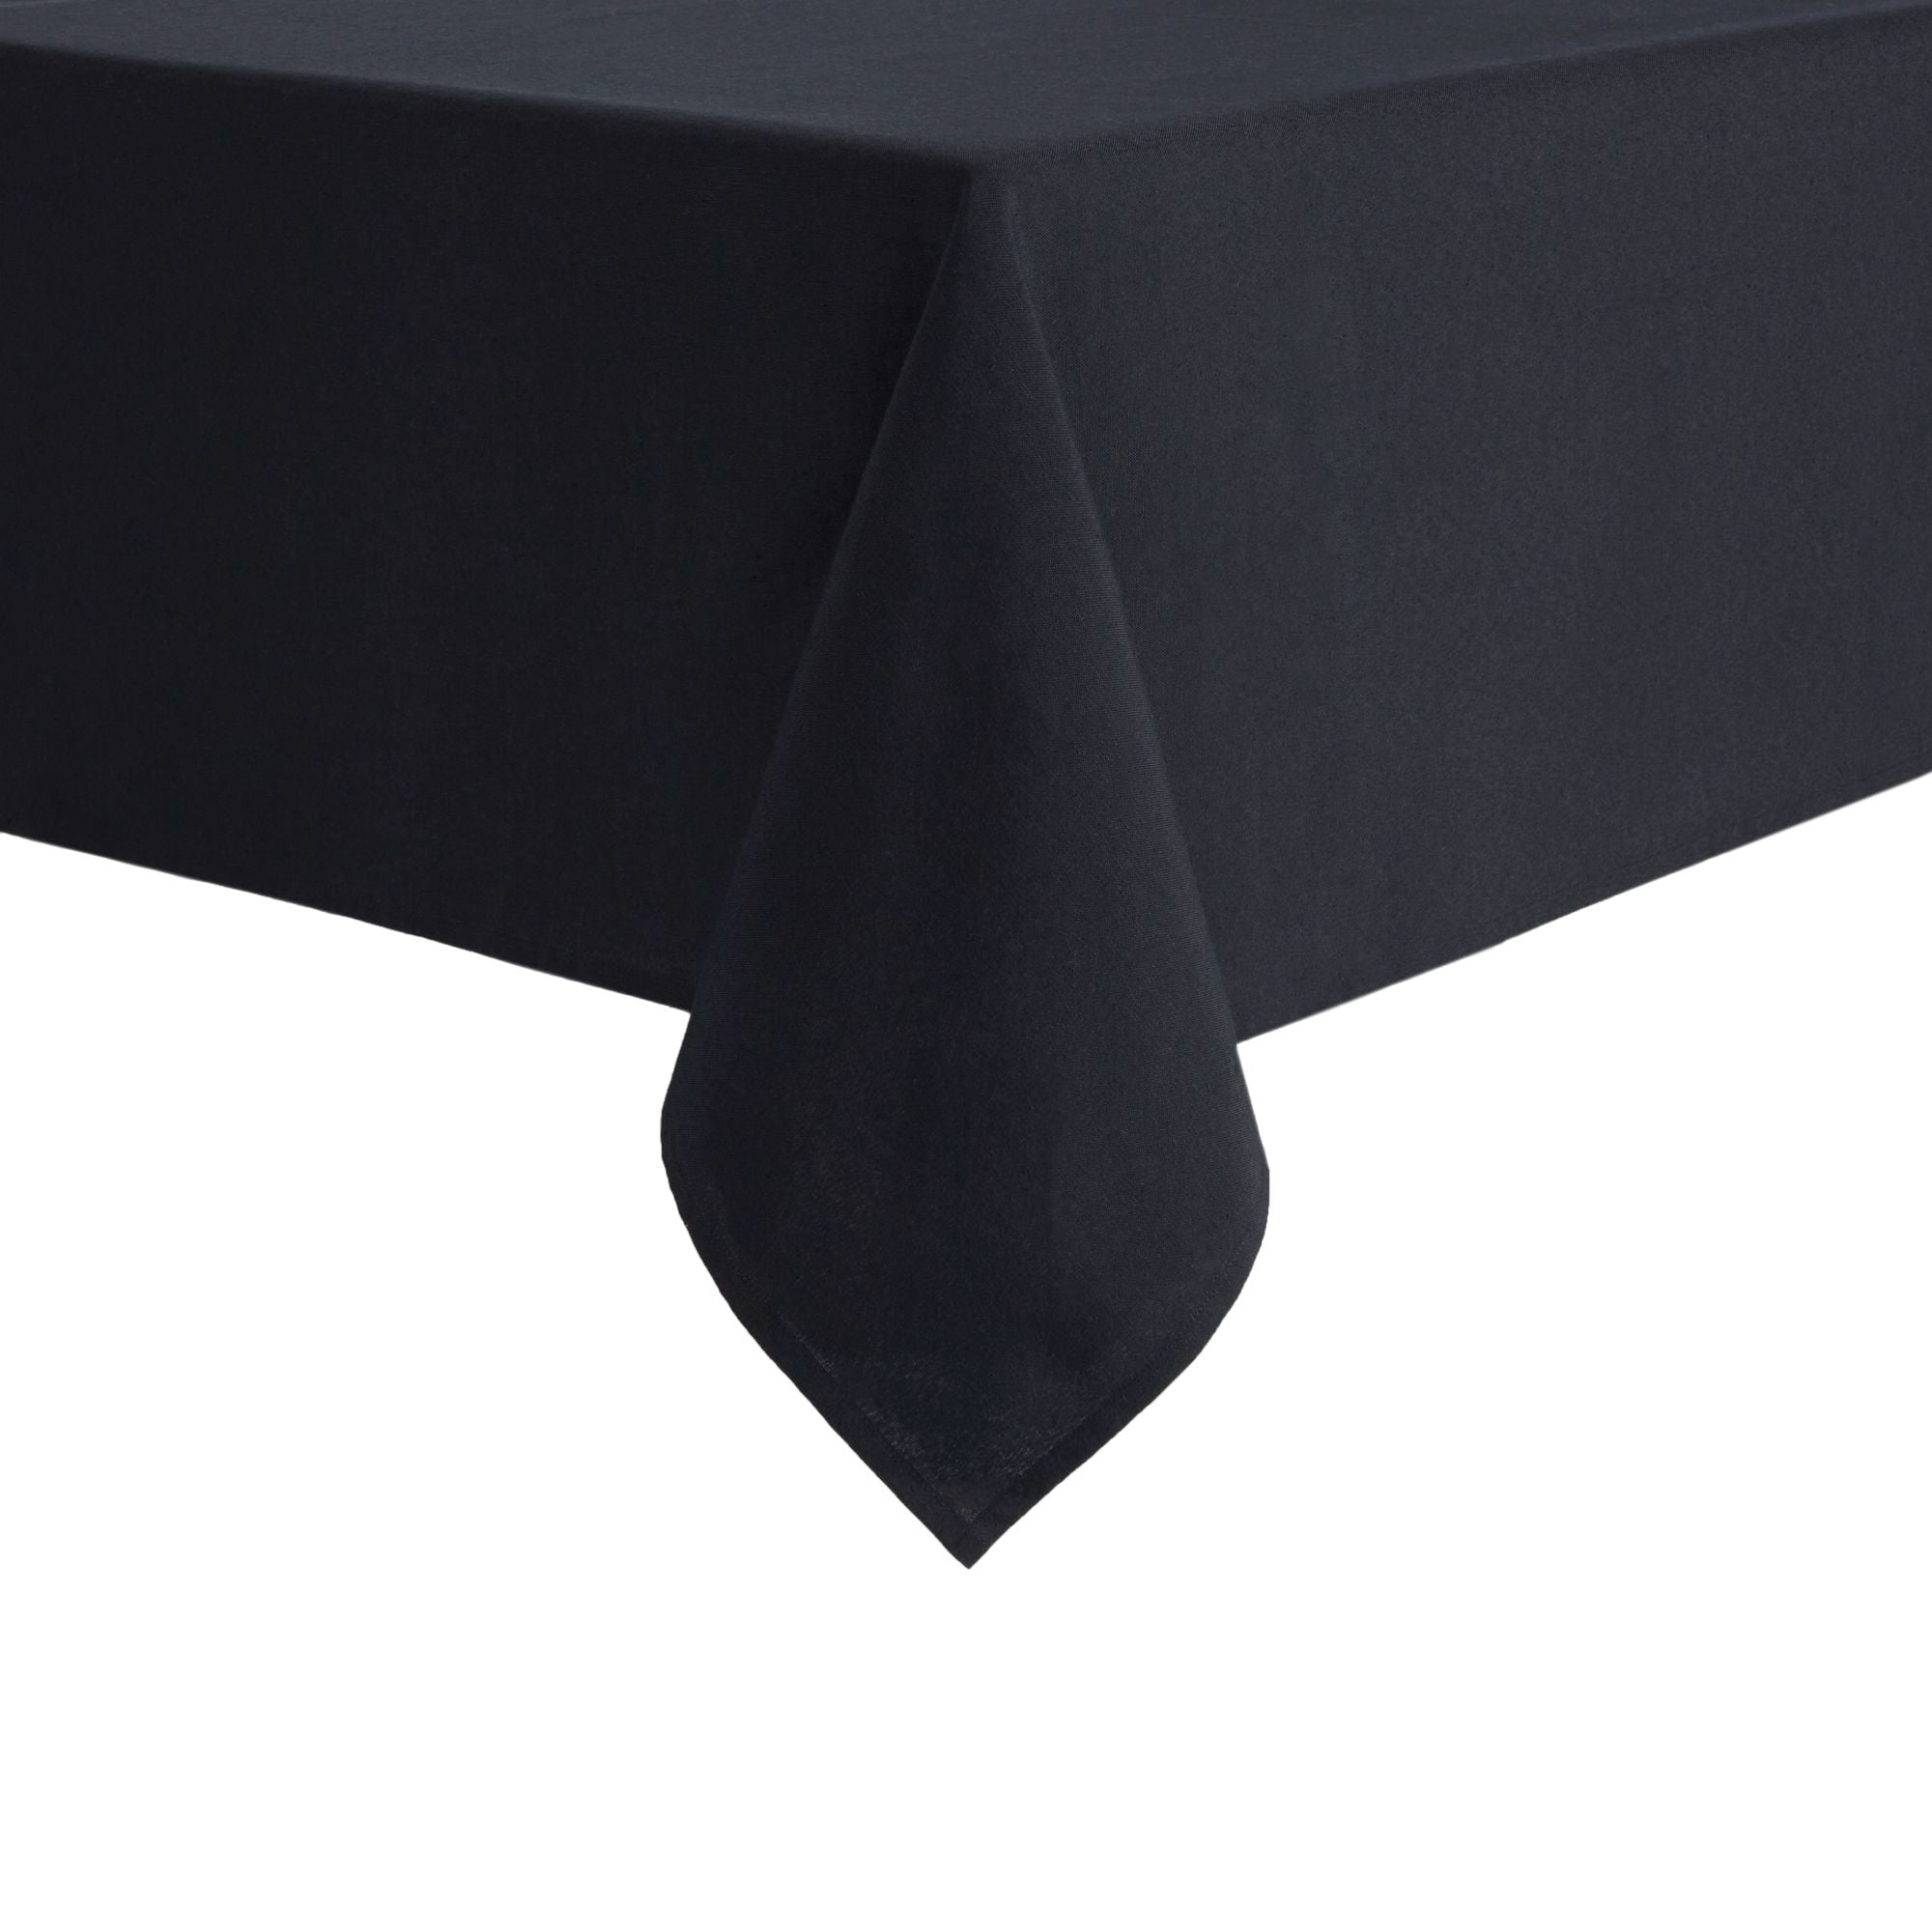 Mainstays Yale Tablecloth, Black, 60"W x 102"L Rectangle, Available in various sizes and colors